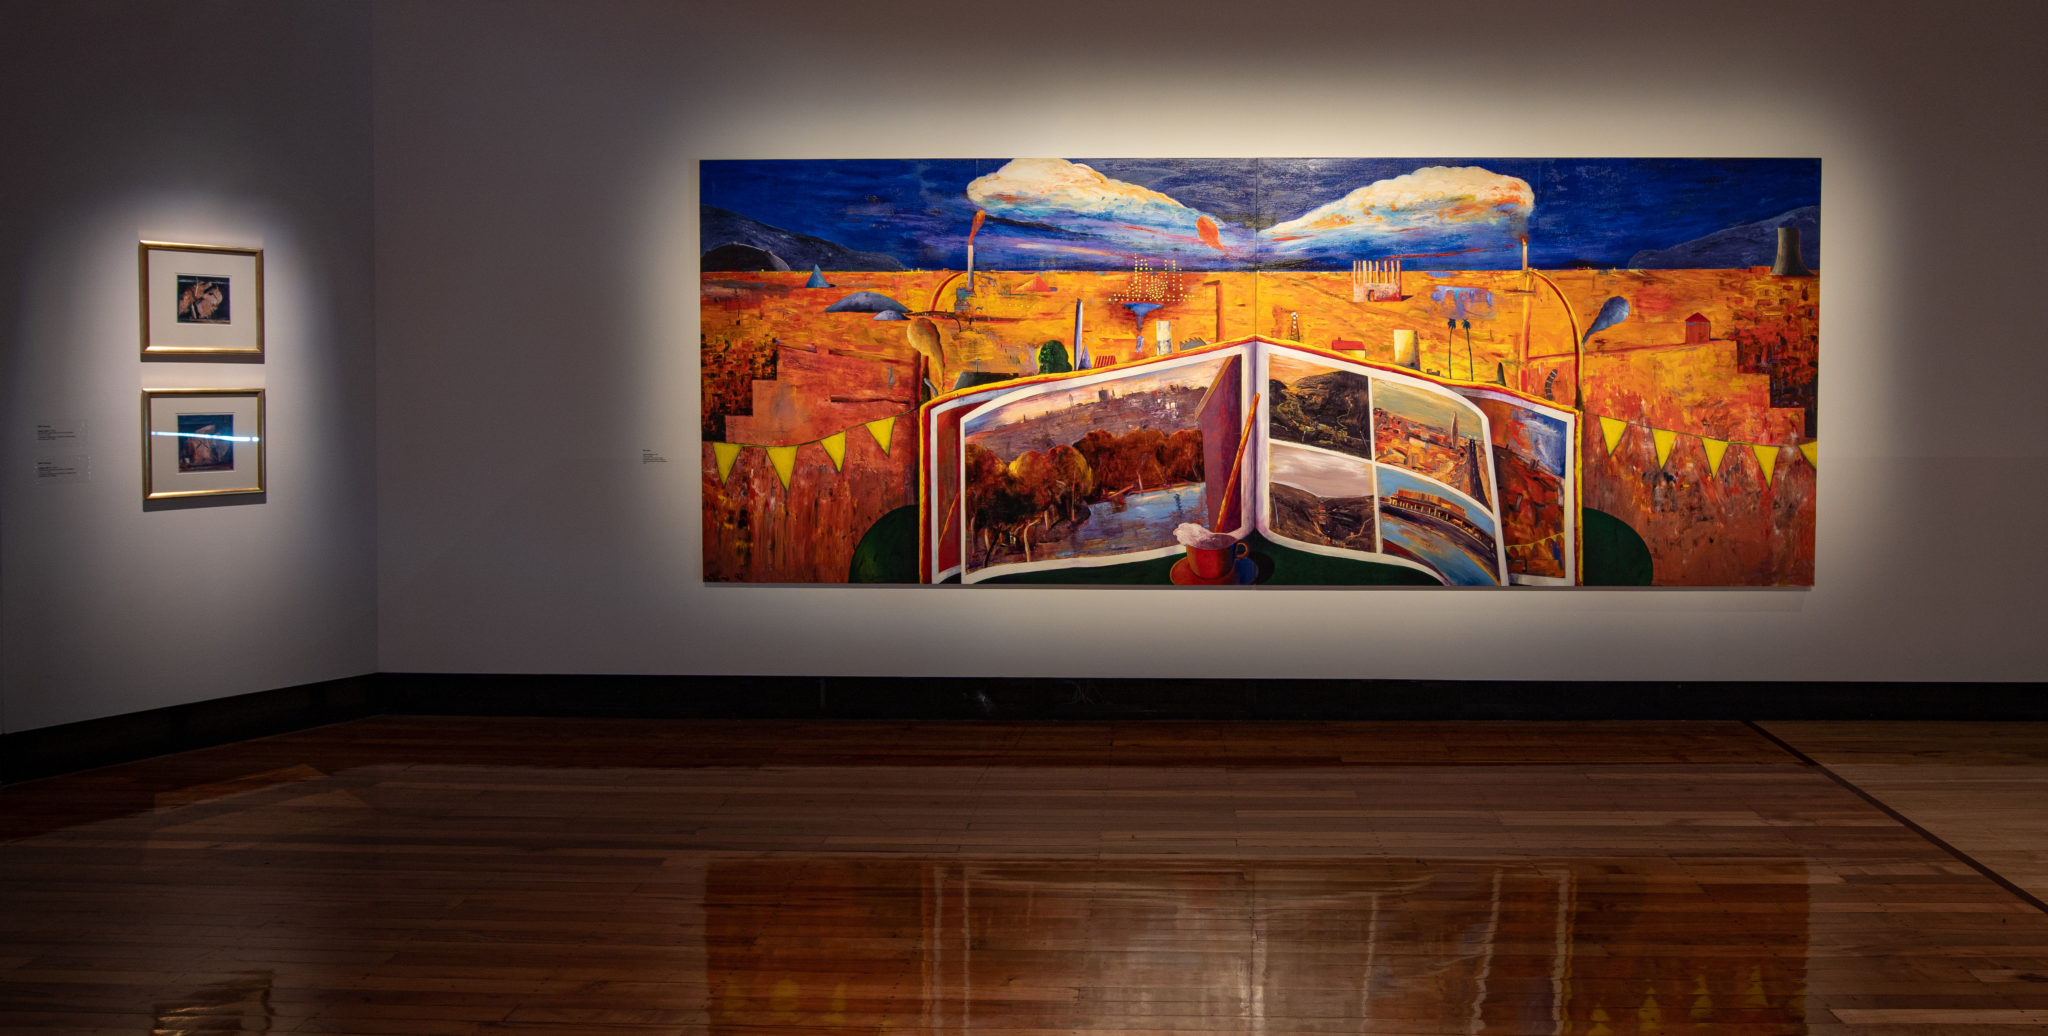 Exhibition documentation of 50 Years, 50 Artists, at Latrobe Regional Gallery, 2021. Pictured: Three works by Bill Young. (left top to bottom) Bill Young, Night Hill I and Night Hill II, 1987 Synthetic polymer paint on paper, 19 x 17 cm, Latrobe Regional Gallery Collection, purchased 1988. (right) Bill Young, Spirit of Morwell, 1990, Acrylic on MDF, Two panels 183 x 240 cm each, Latrobe Regional Gallery Collection, commissioned by the City of Morwell, 1990.